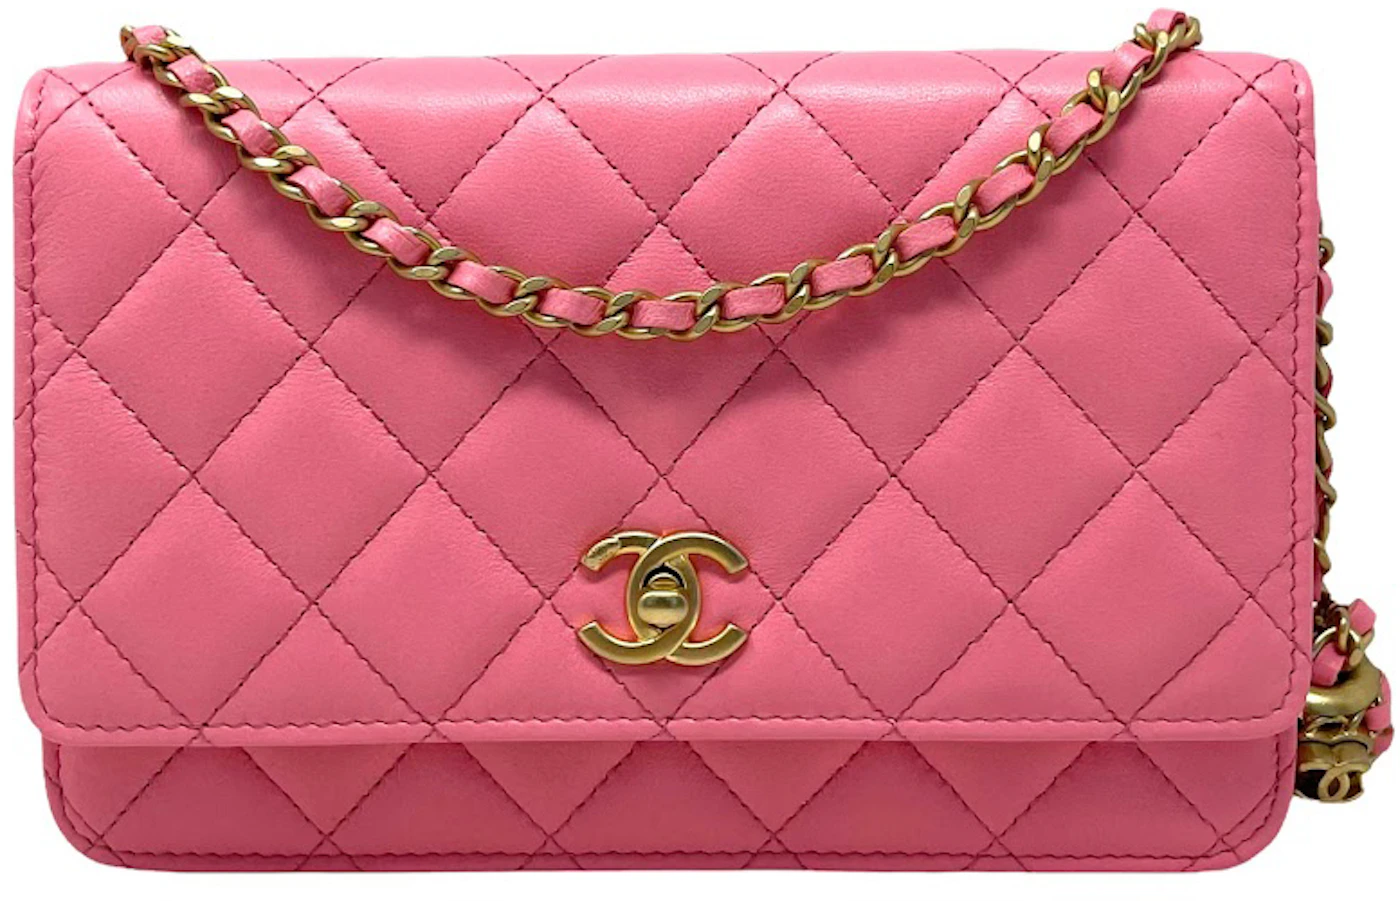 Timeless/classique leather crossbody bag Chanel Pink in Leather - 33329179